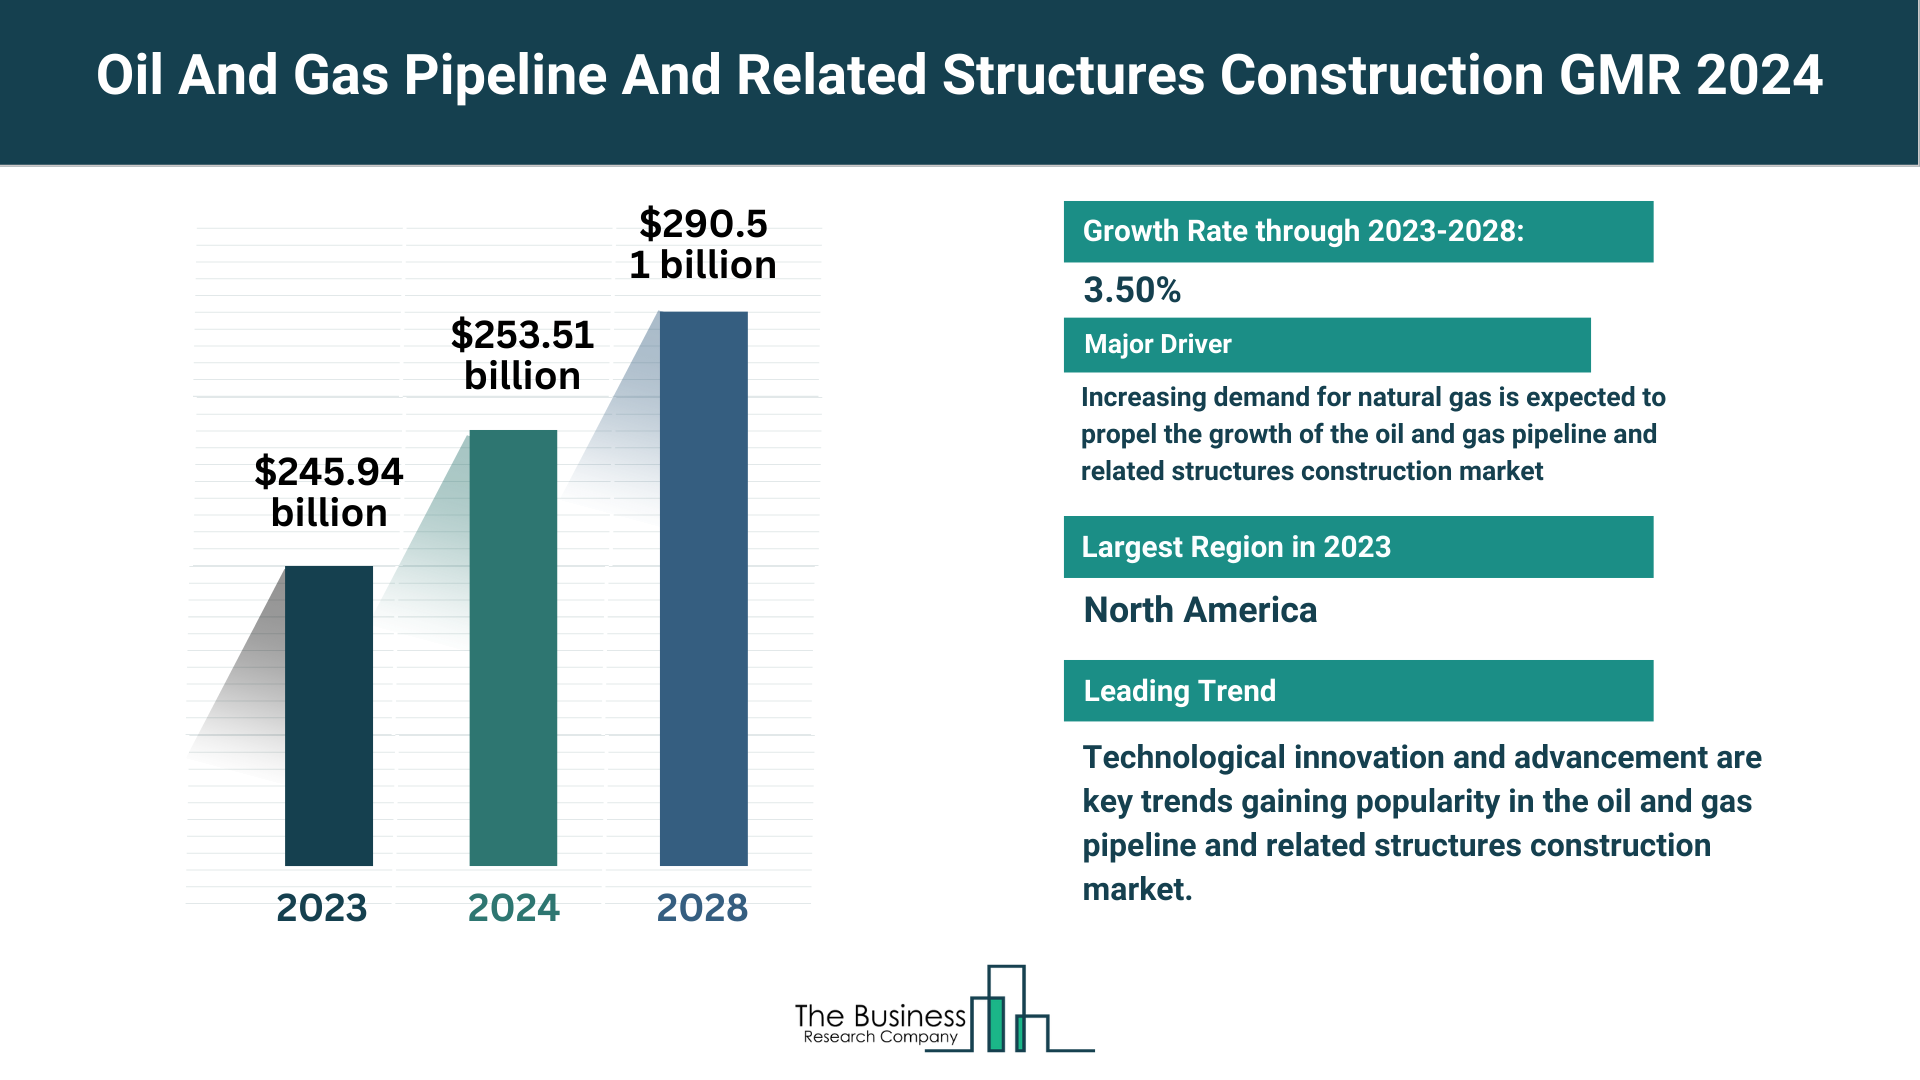 Global Oil And Gas Pipeline And Related Structures Construction Market